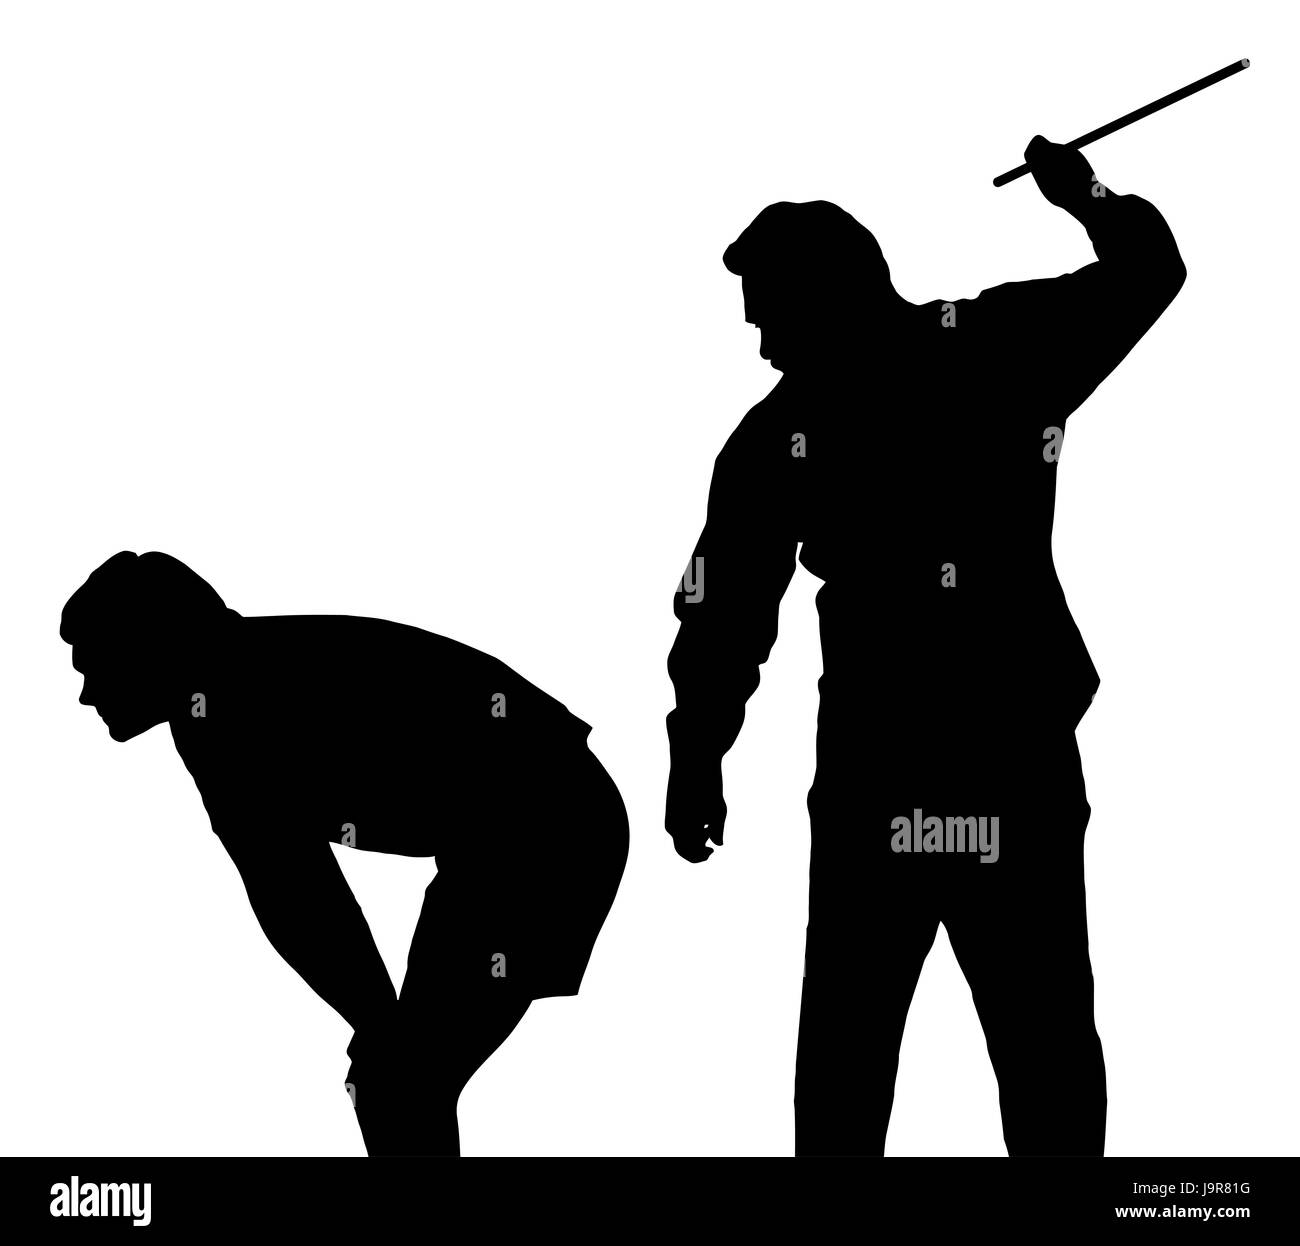 Silhouette of a man applying corporal punishment on teenage boy Stock Photo